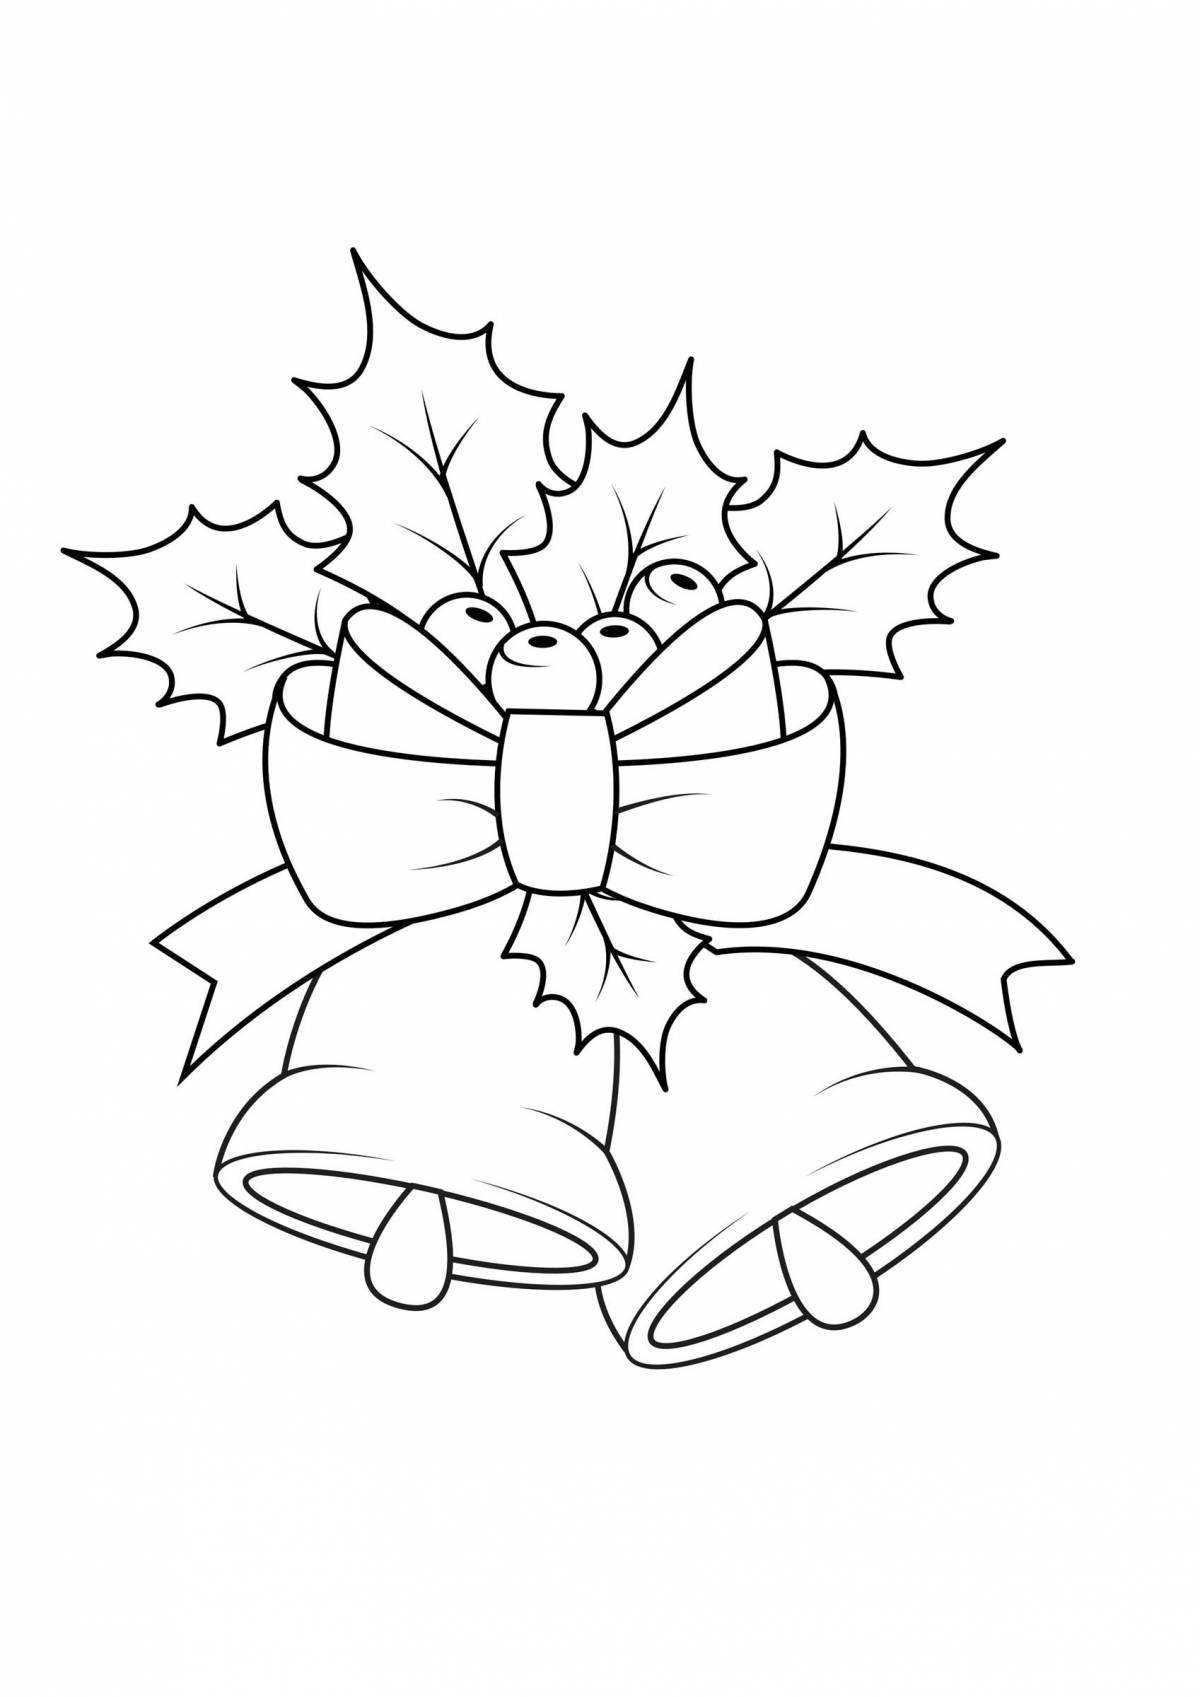 Colorful jingle bells coloring pages